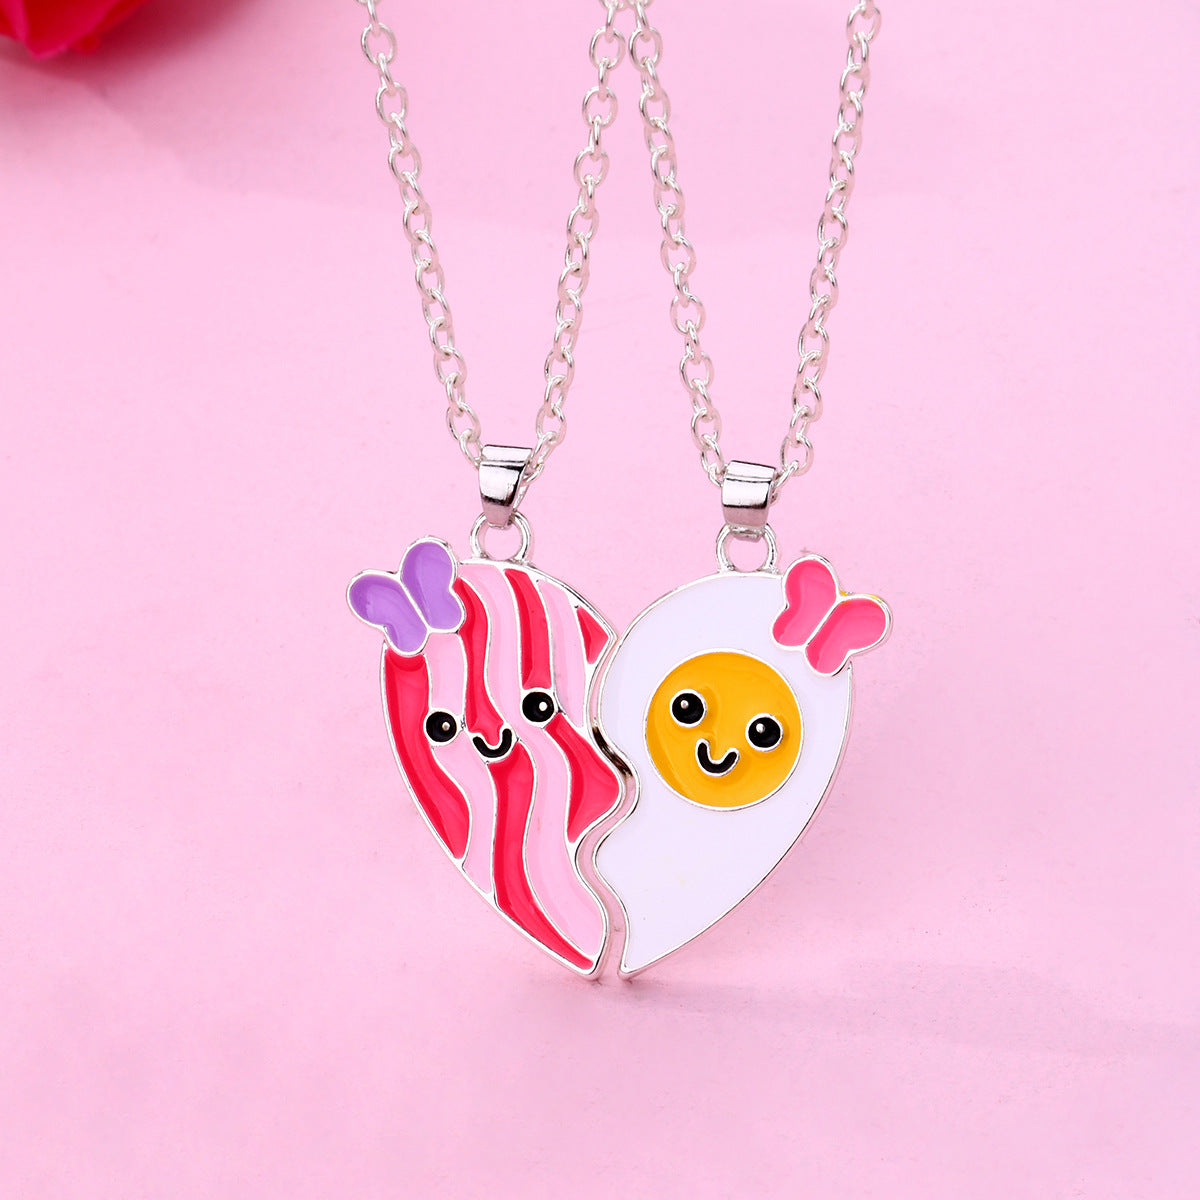 Friendship Necklace for 3 - Etsy